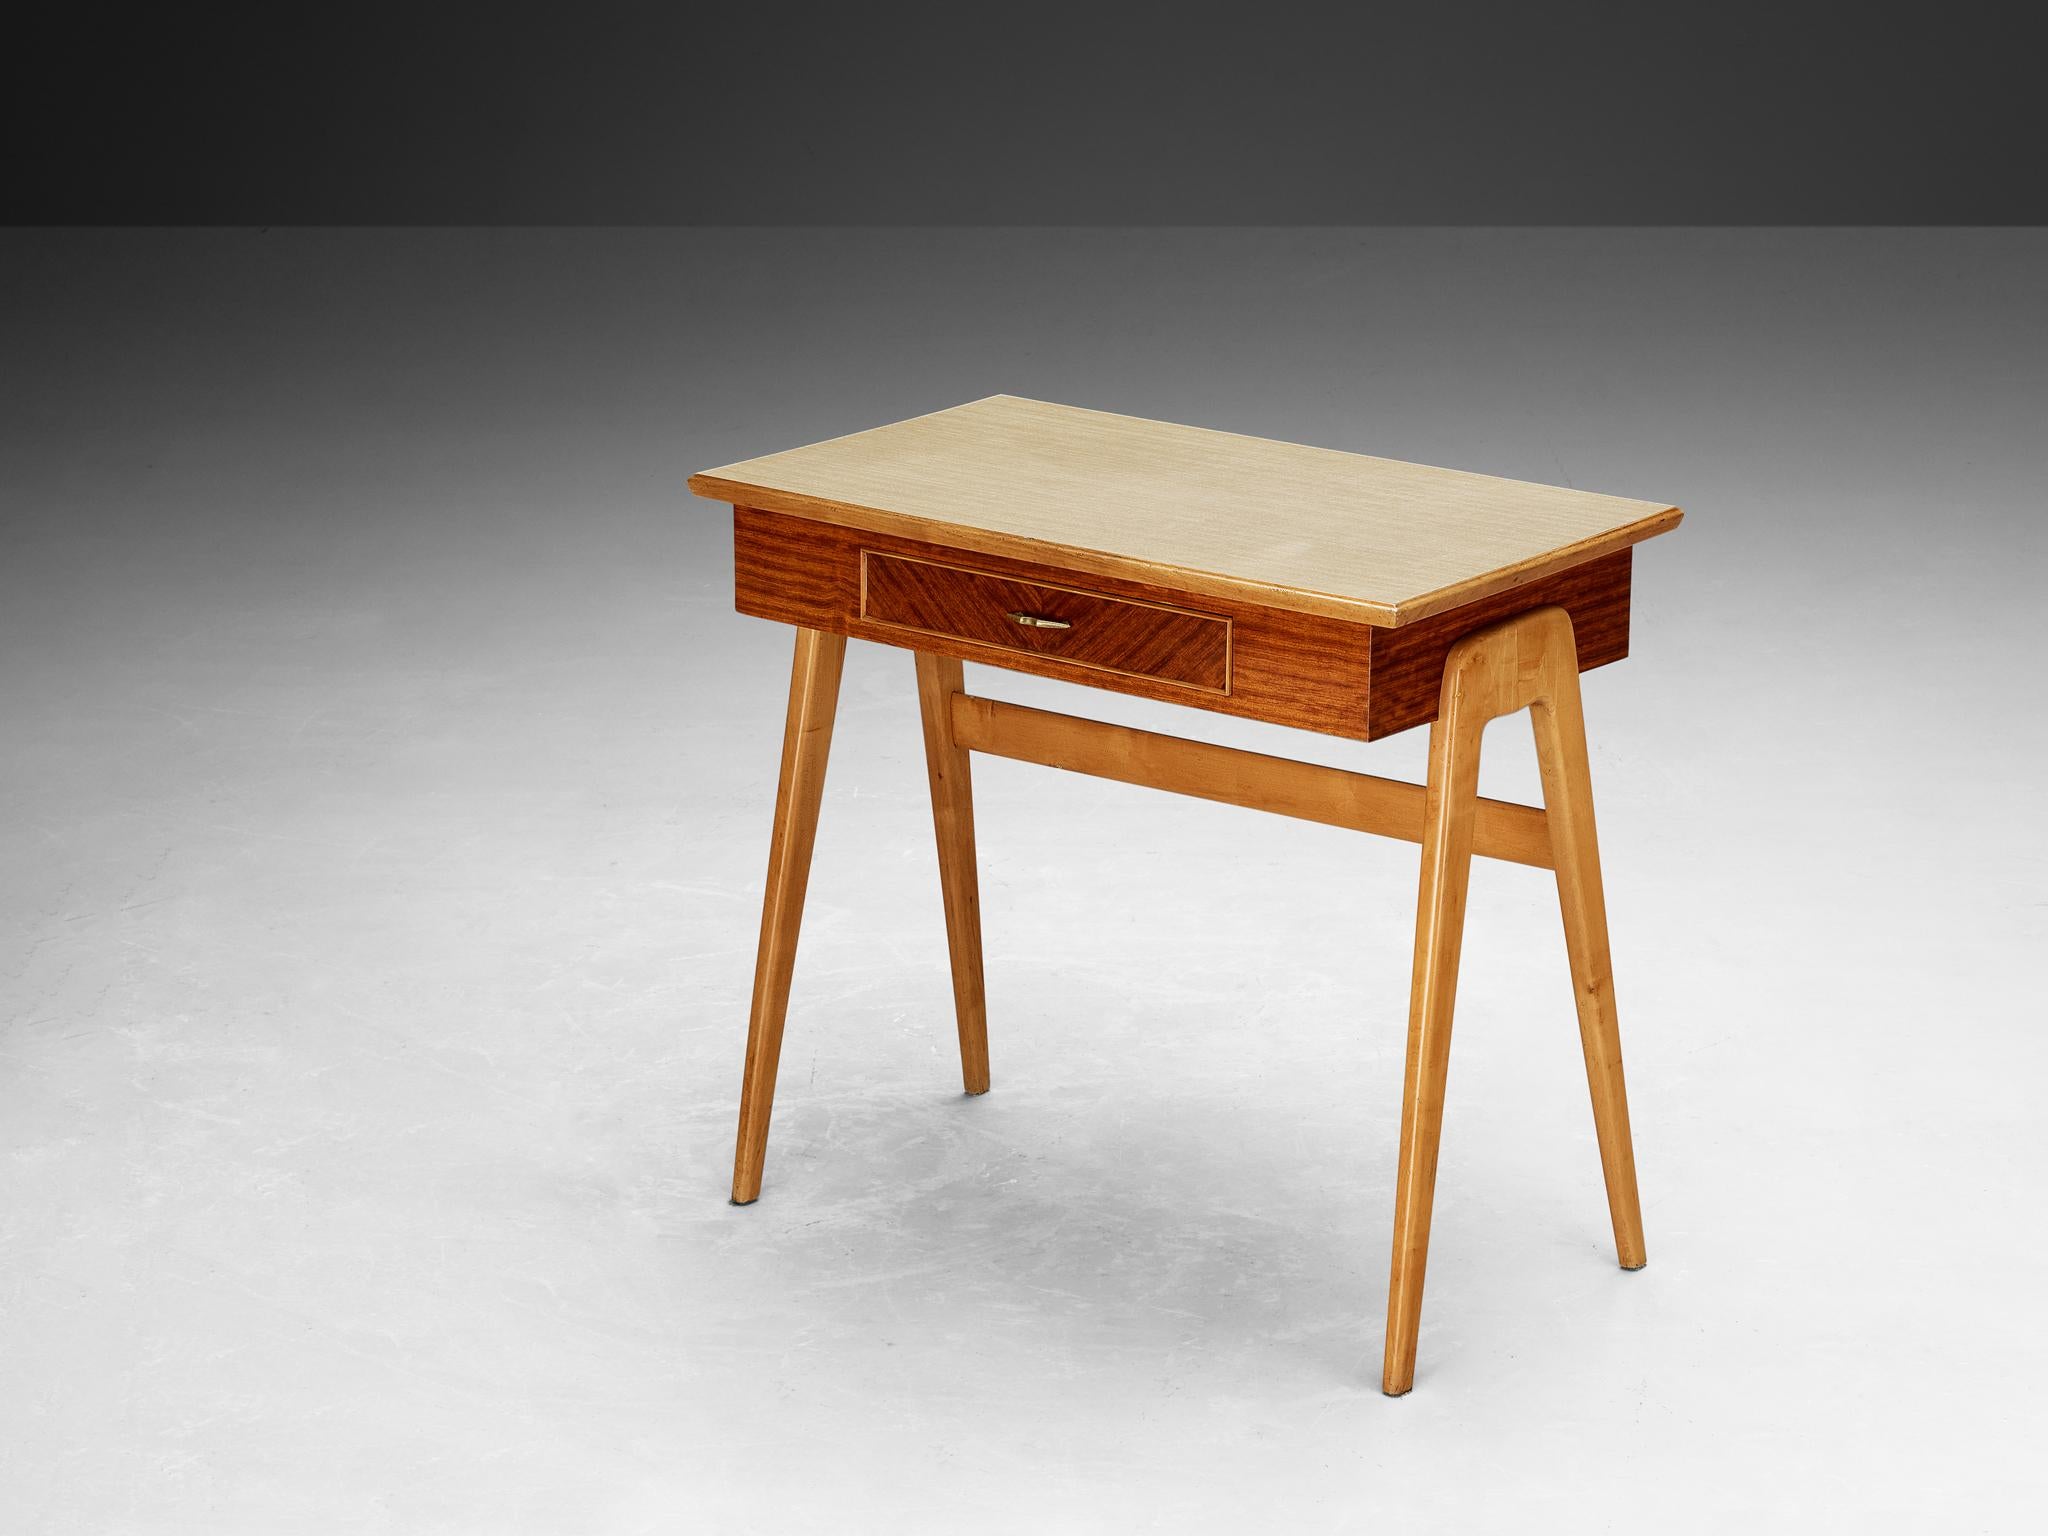 Writing desk, cherry, mahogany, brass, formica, Italy, 1950s

Very elegant desk made in Italy in the 1950s. The framework is executed in cherry. The upper part of this piece is made from mahogany veneer, and the top is inlayed with a very practical